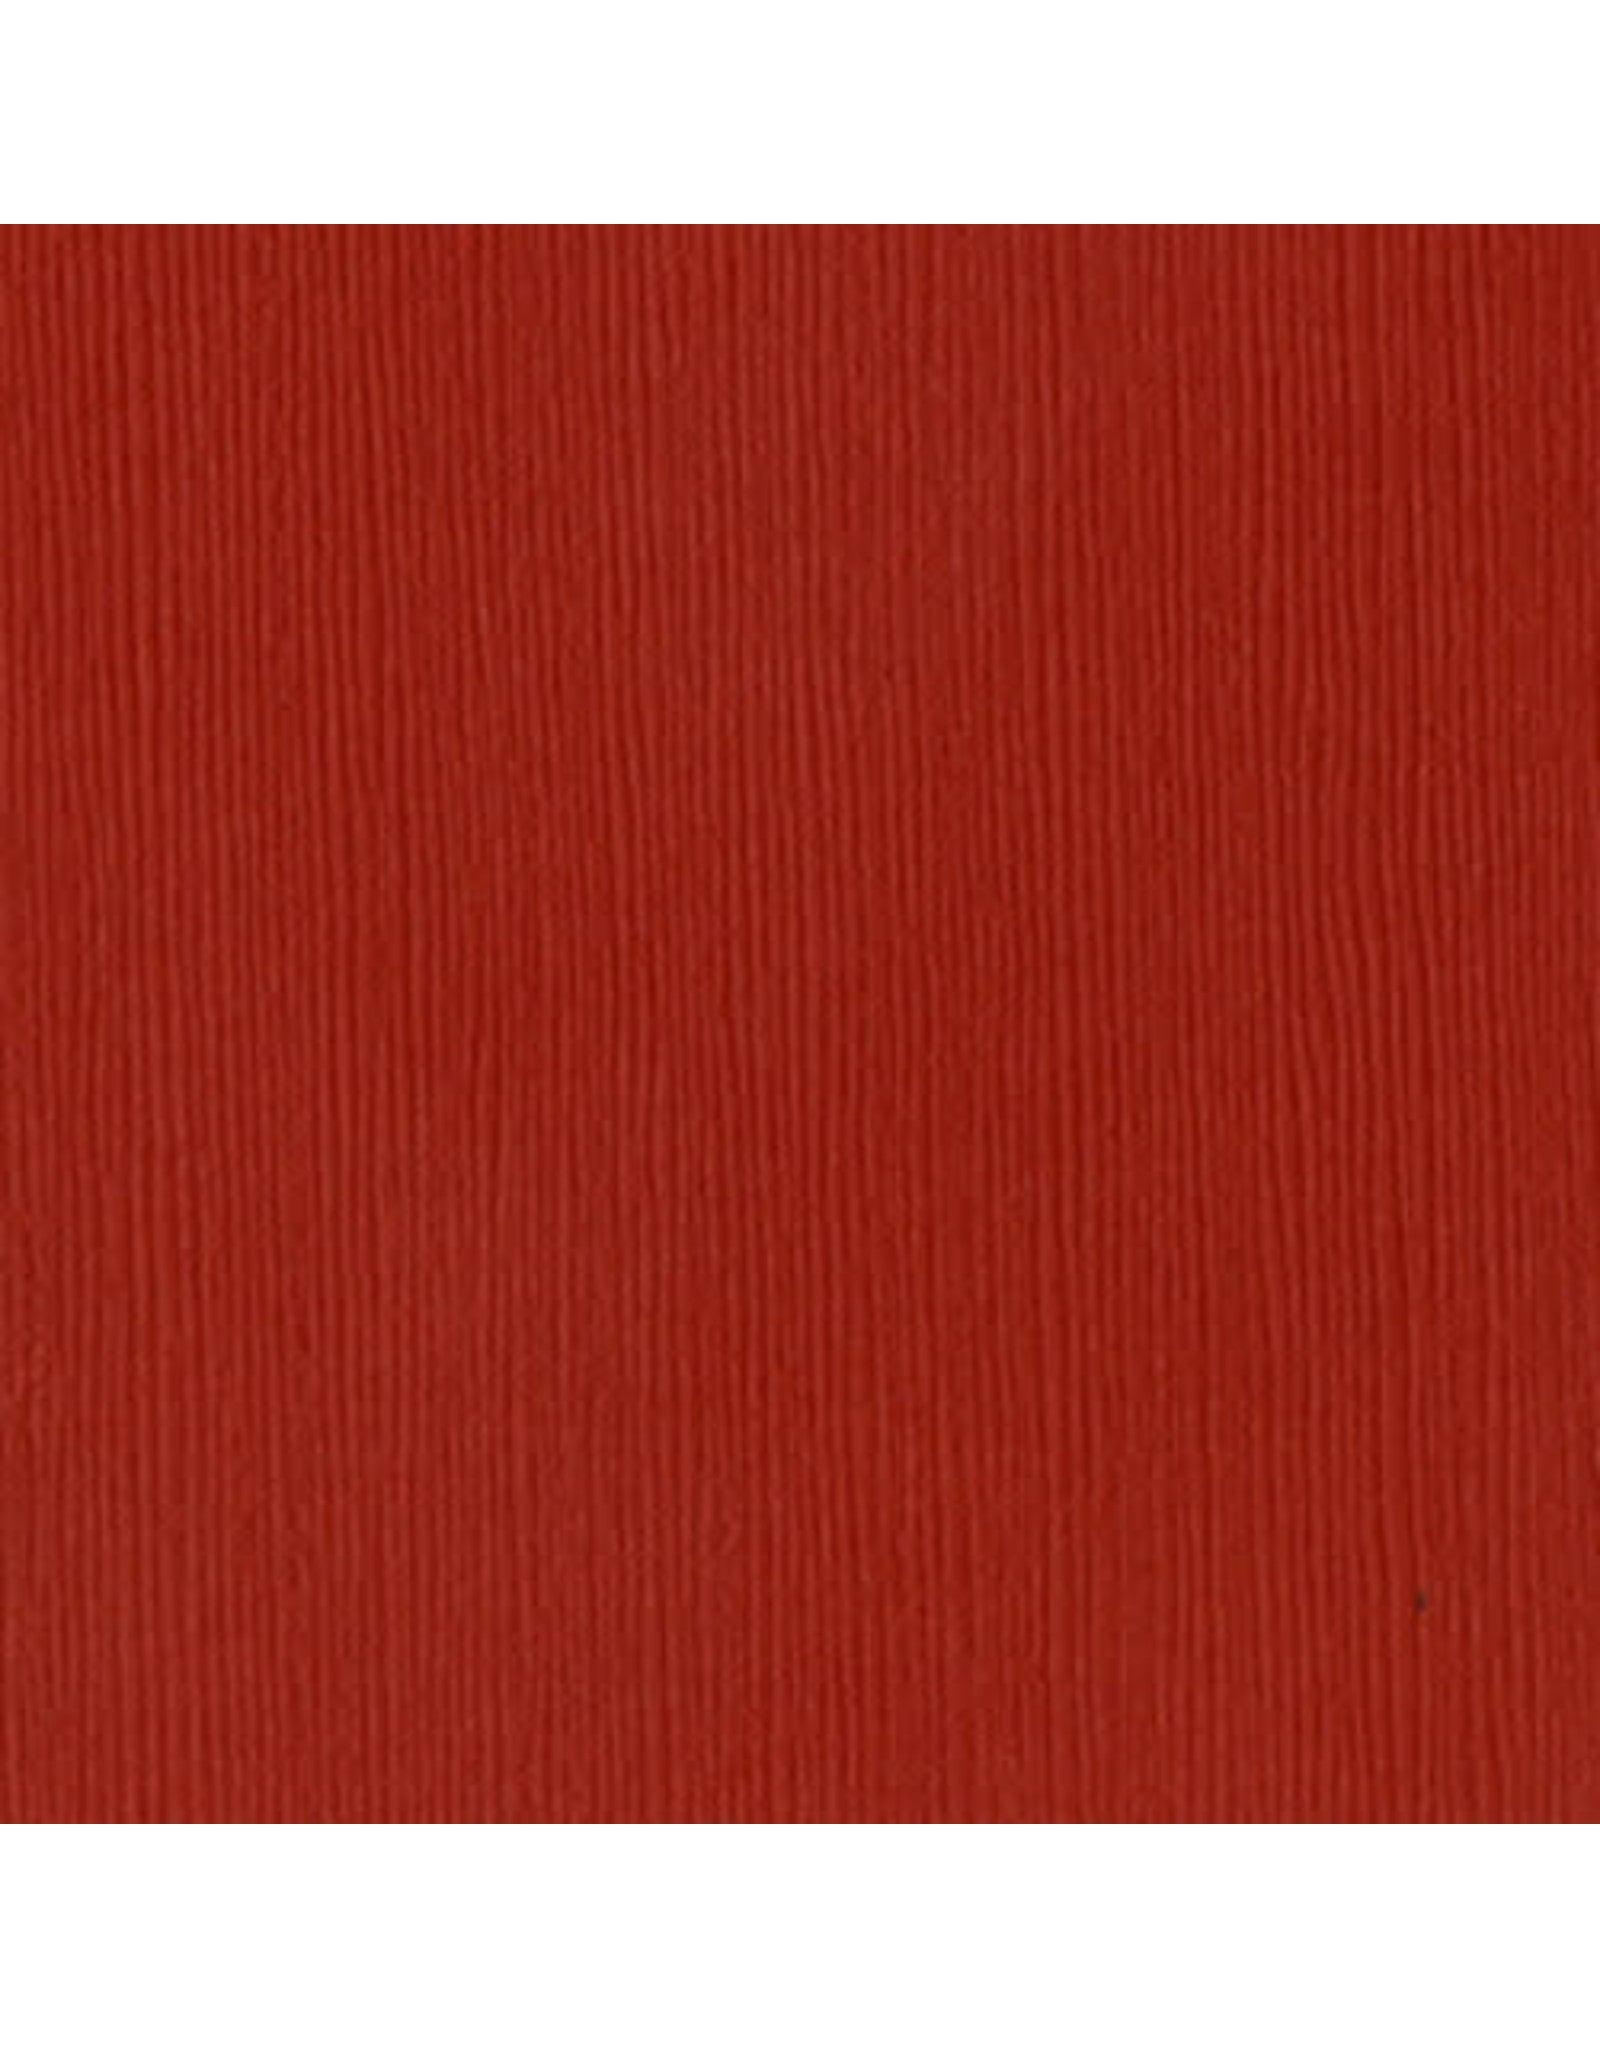 Bazzill - 12x12 Cardstock (Fourz) - Classic Red